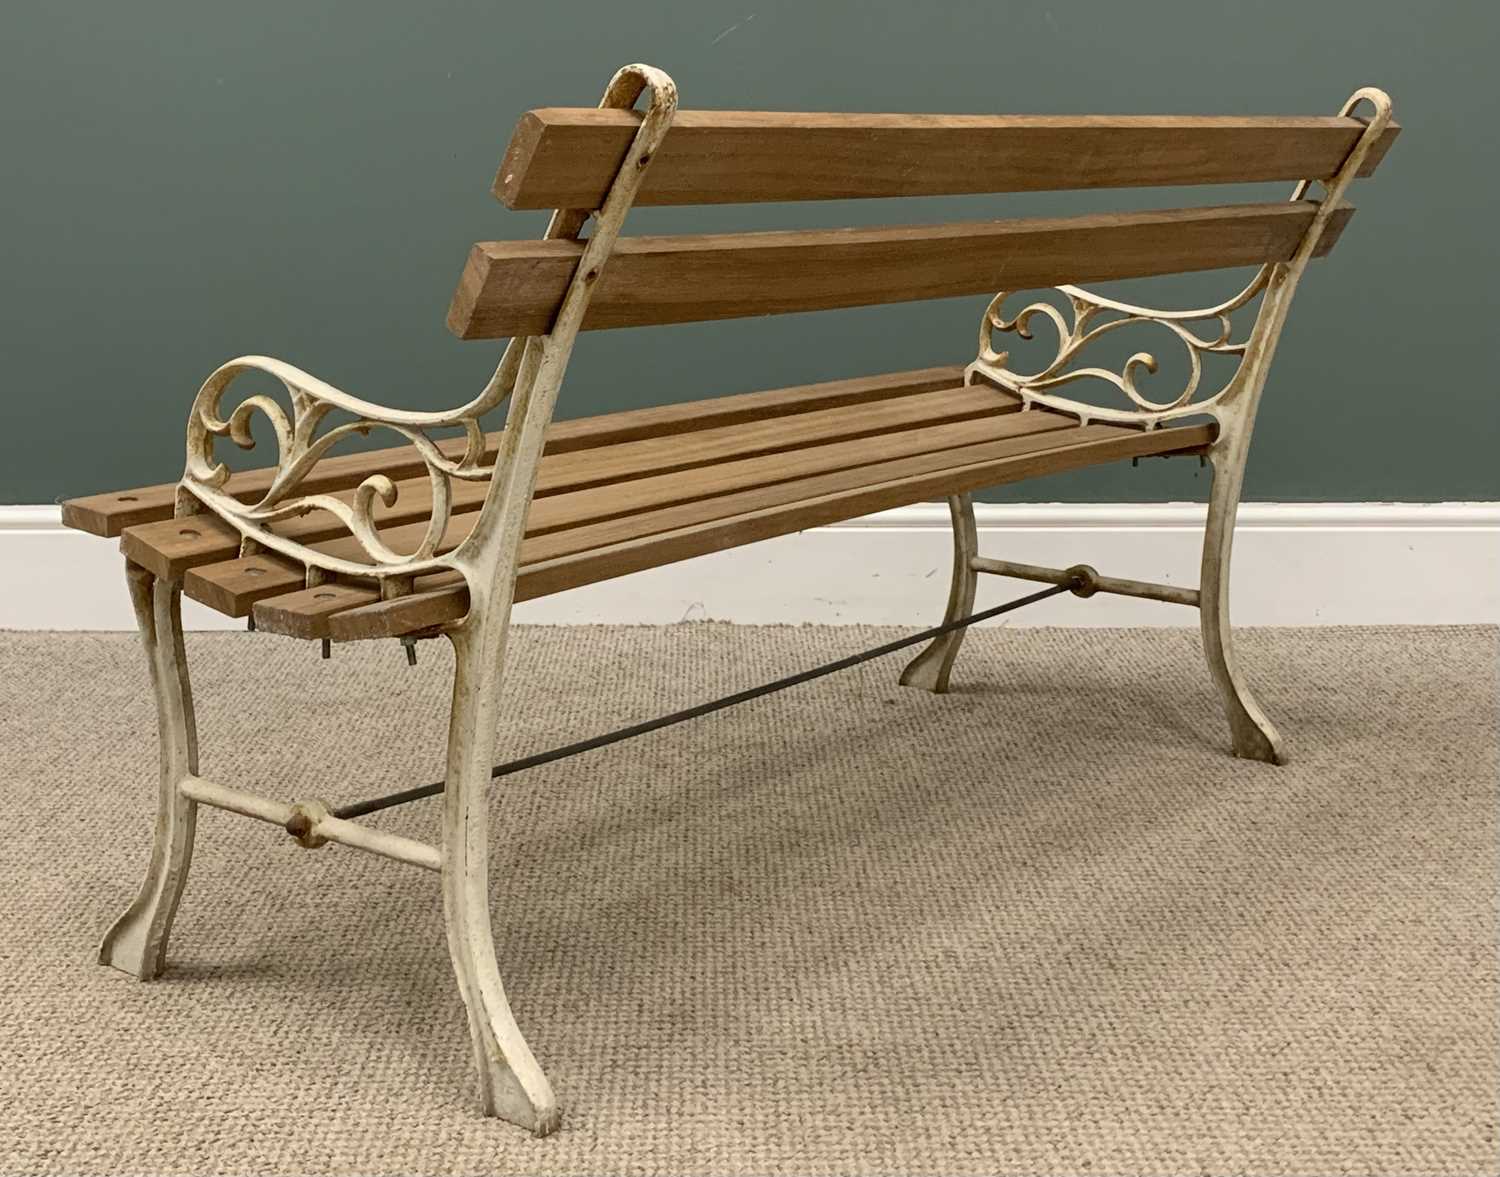 GARDEN BENCH with slatted wooden planks and cast ends, 69 (h) x 122 (w) x 56 (d) cms Provenance: - Image 2 of 3